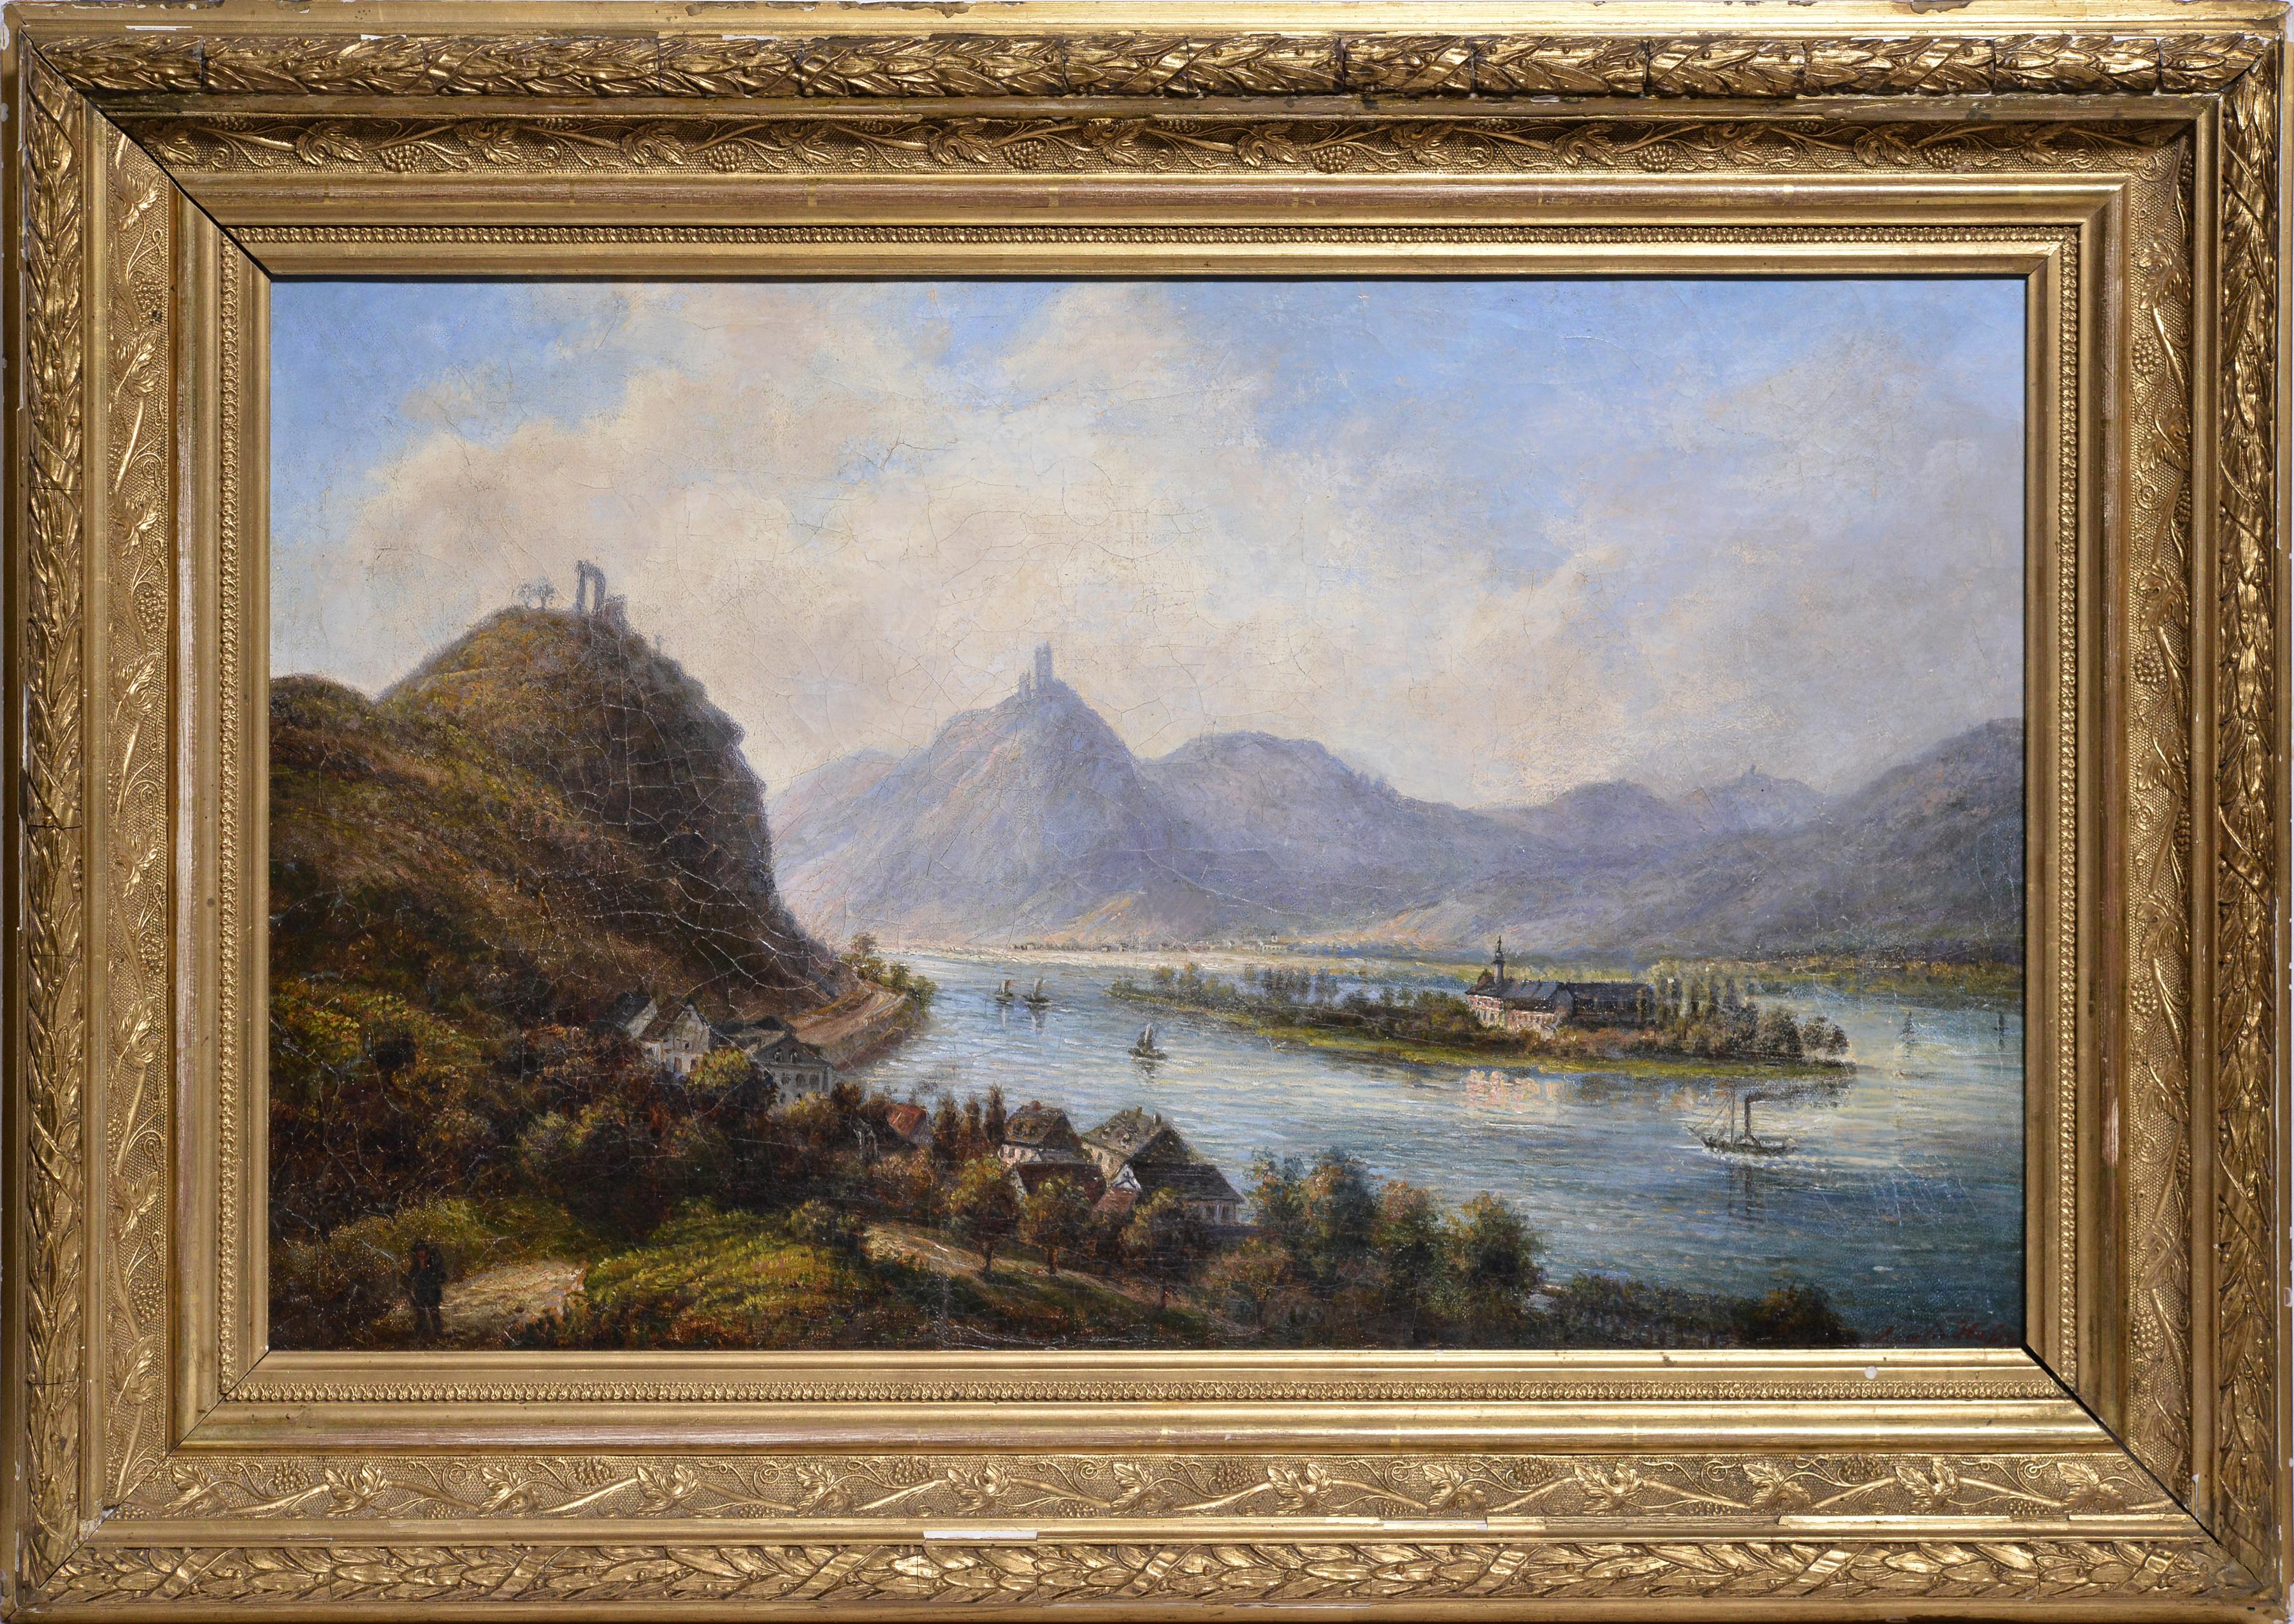 Unknown Landscape Painting - Alpine Valley Landscape with High Hills and River 19th Century Oil Painting